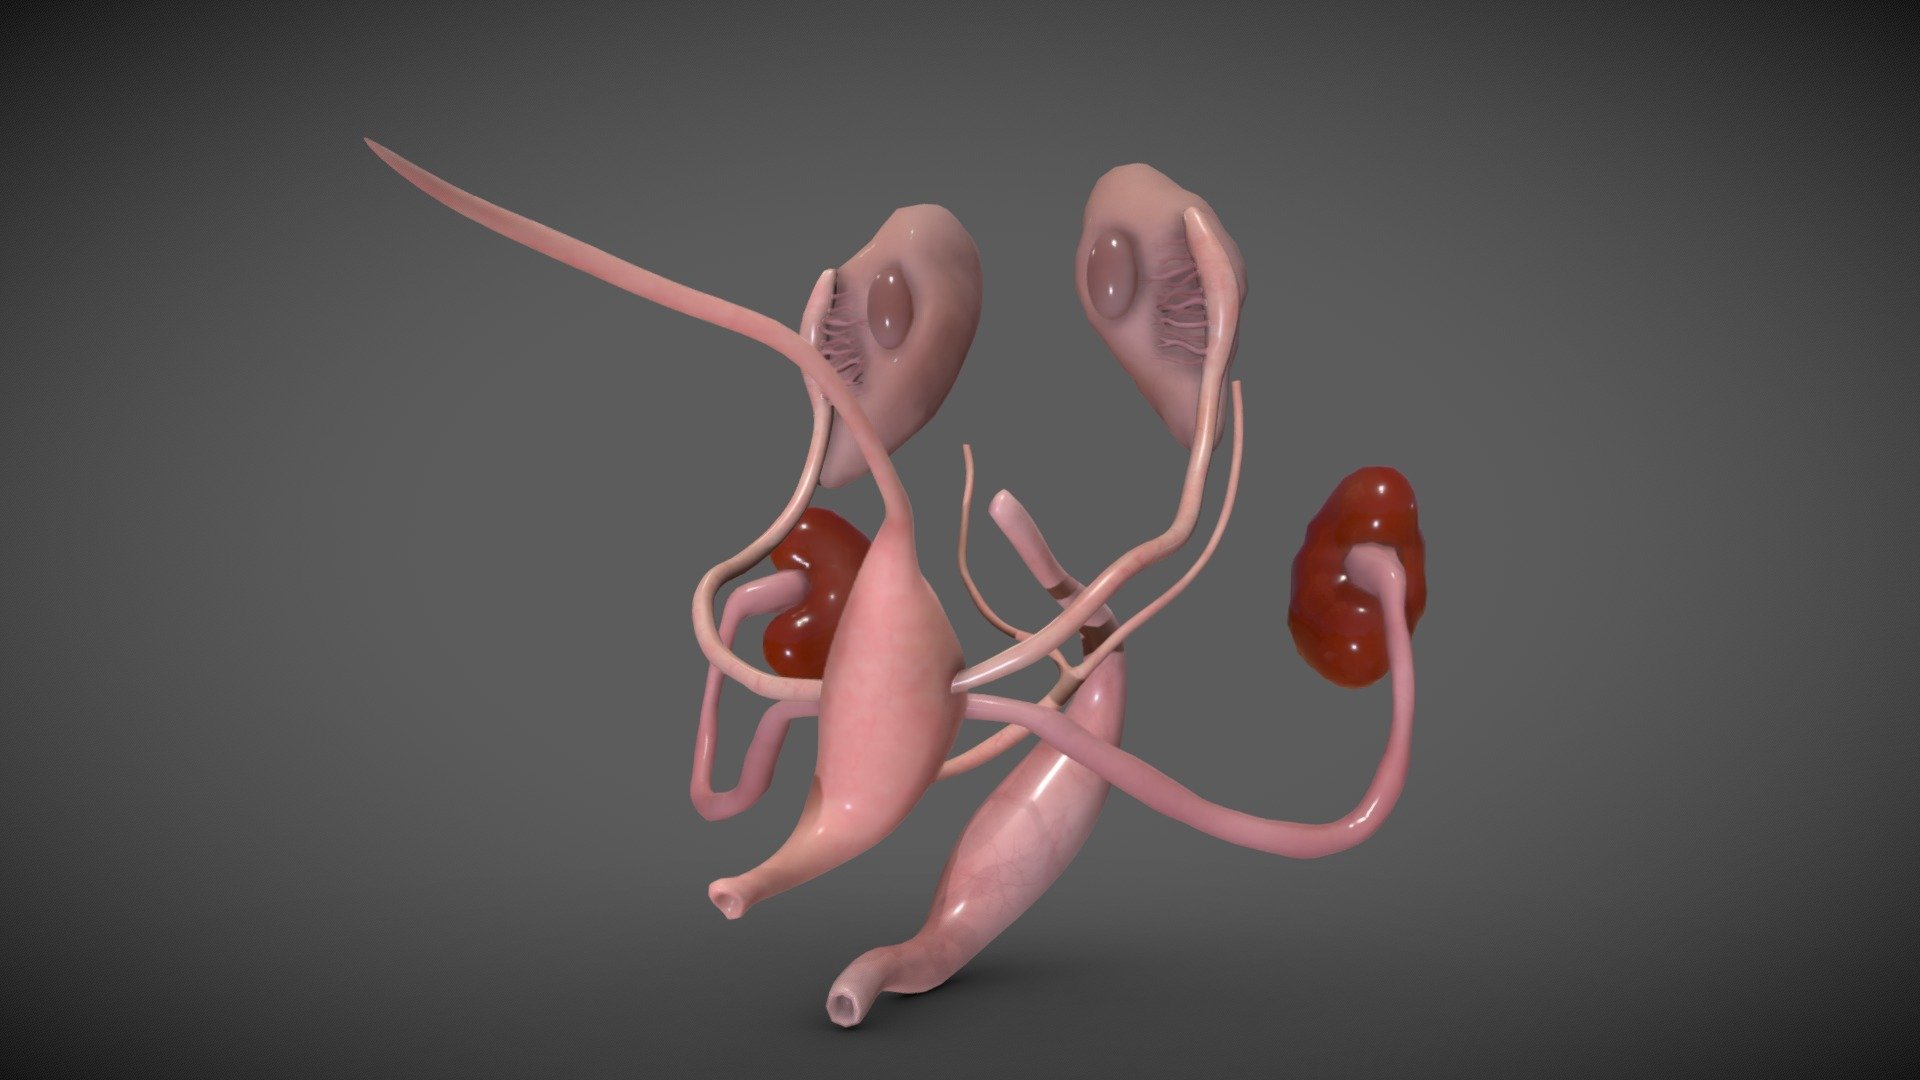 The  reproductive system provides several functions. The ovaries produce the egg cells, called the ova or oocytes. The oocytes are then transported to the fallopian tube where fertilization by a sperm may occur. The fertilized egg then moves to the uterus, where the uterine lining has thickened in response to the normal hormones of the reproductive cycle. Once in the uterus, the fertilized egg can implant into thickened uterine lining and continue to develop. If implantation does not take place, the uterine lining is shed as menstrual flow. In addition, the female reproductive system produces female sex hormones that maintain the reproductive cycle.

This model provides an accurate 3D representation of Week eight (week 8) fetus female reproductive system.
References:
1-anatomy of human embryo electron microscope ( 1st Edition ) .
2-Netters atals of human embryology (Updated Edition) 3d model